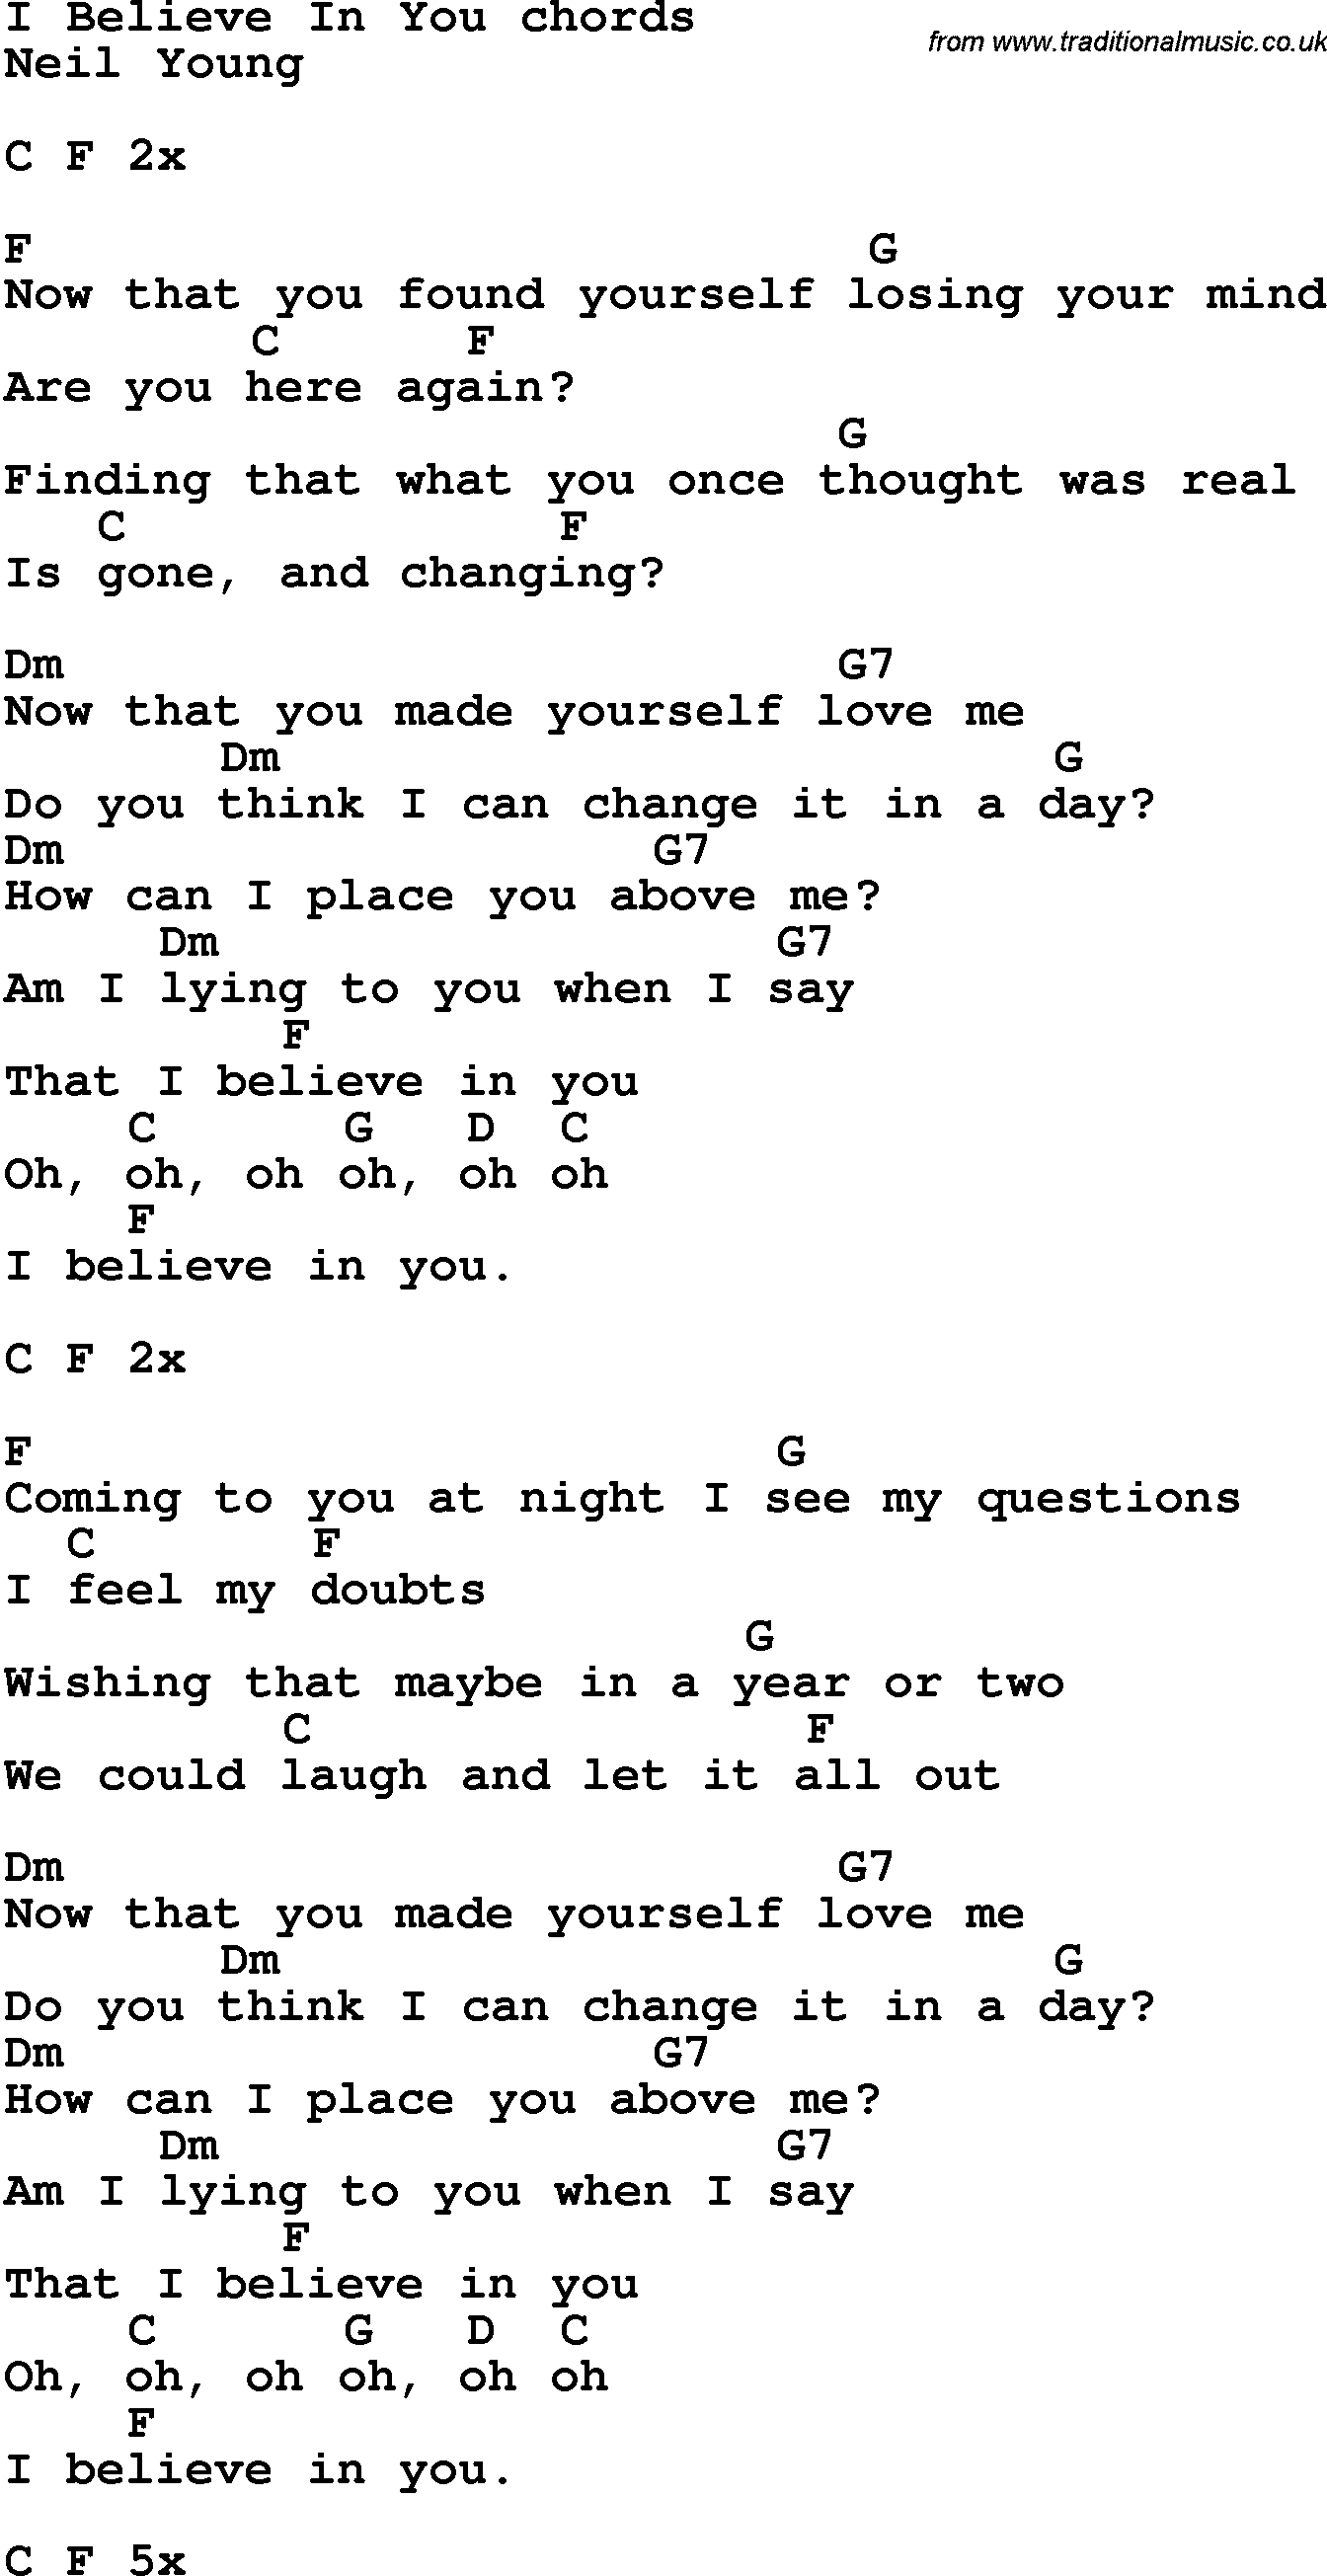 lyrics to tell me why neil young